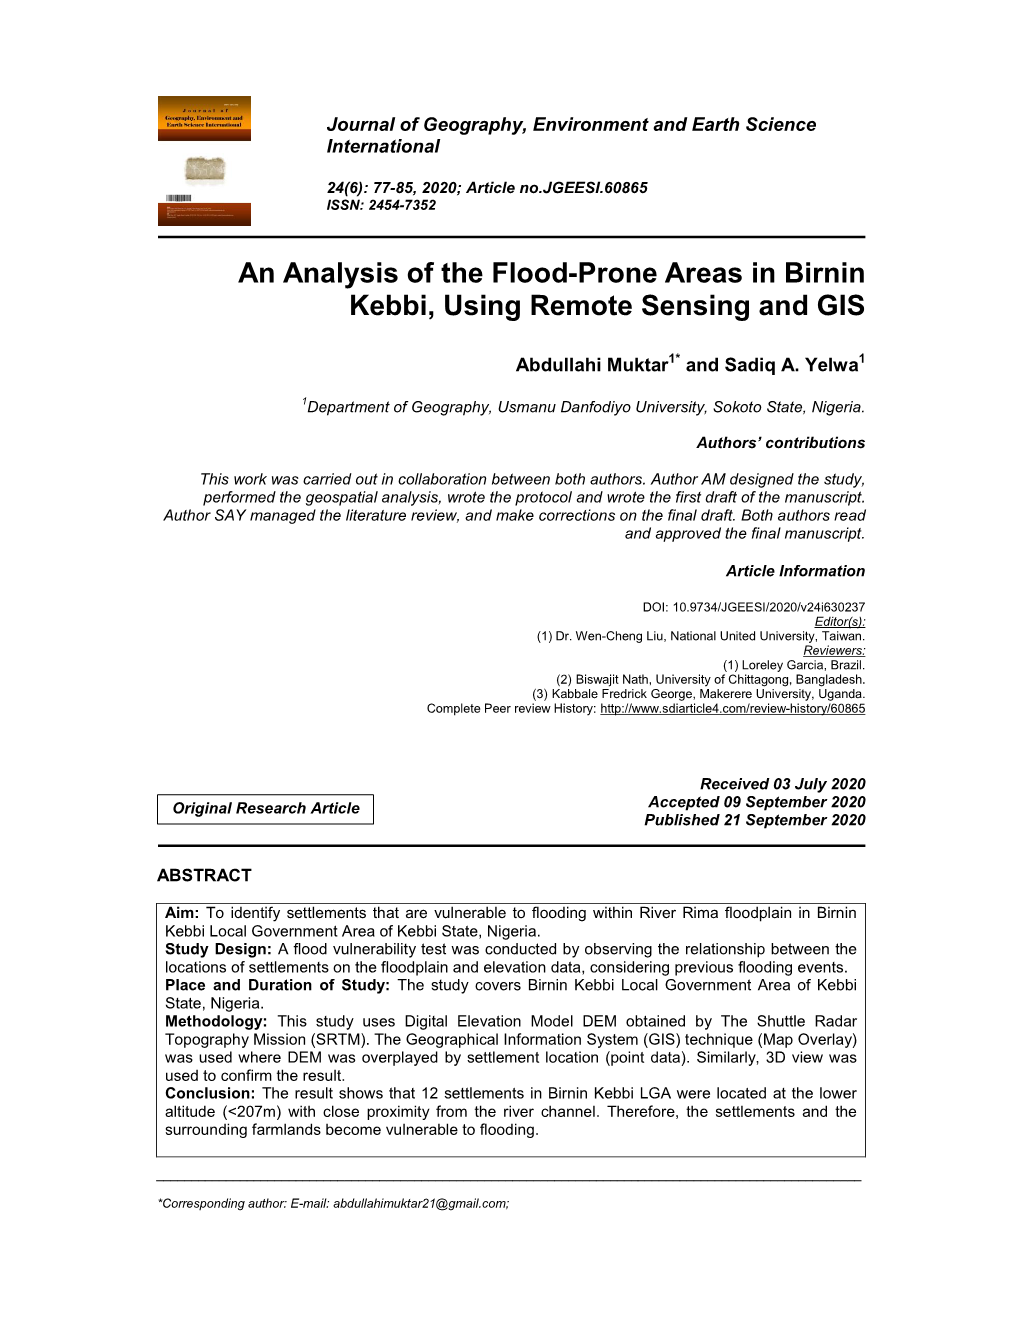 An Analysis of the Flood-Prone Areas in Birnin Kebbi, Using Remote Sensing and GIS